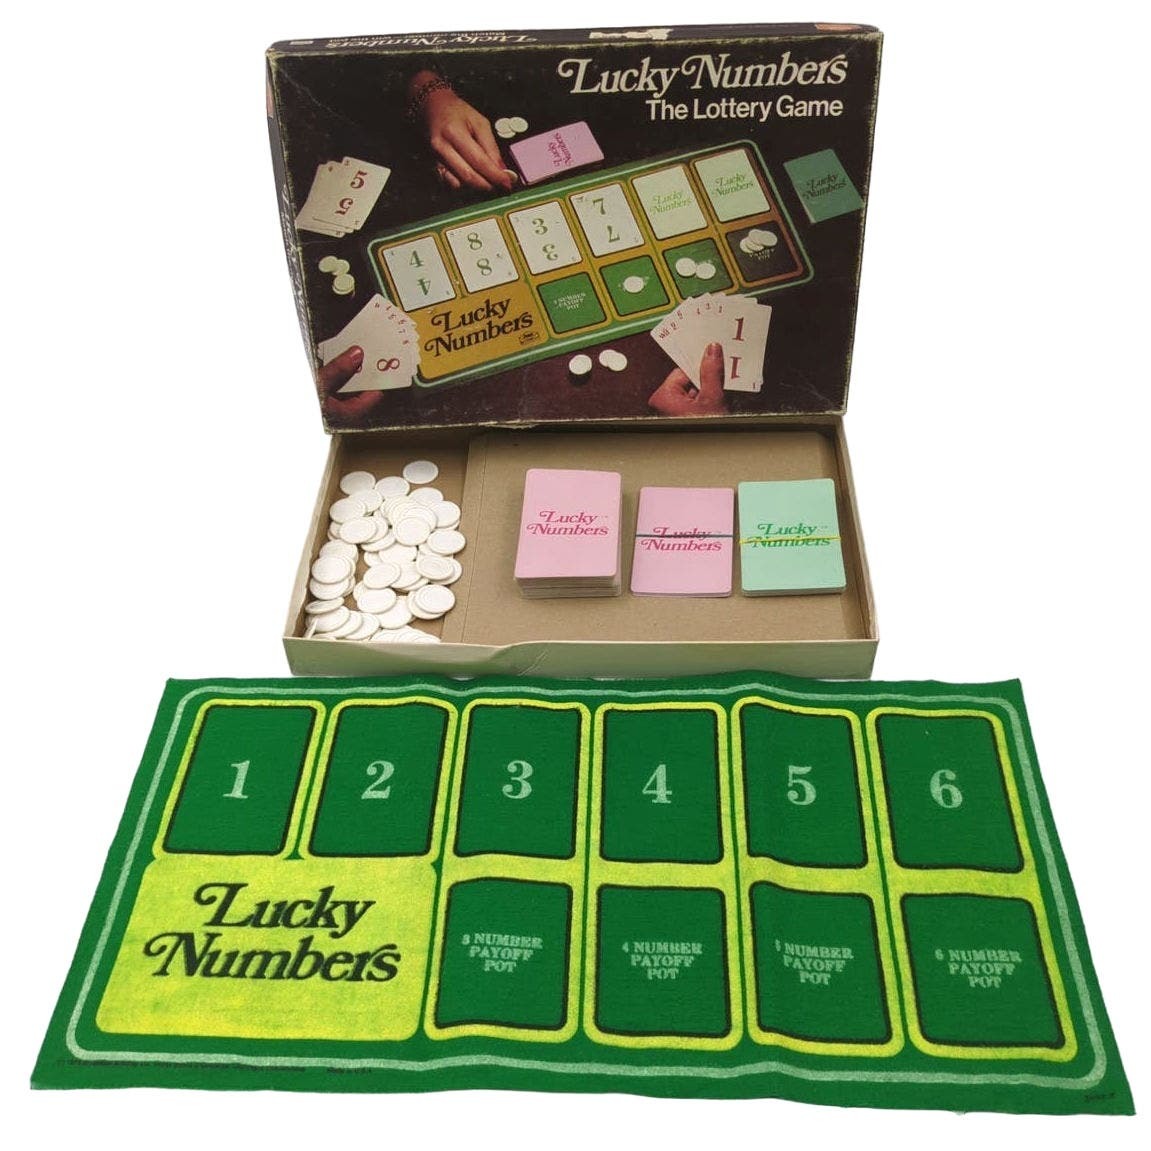 VTG 1975 Milton Bradley Lucky Numbers The Lottery Card Game Complete Gambling - $29.69